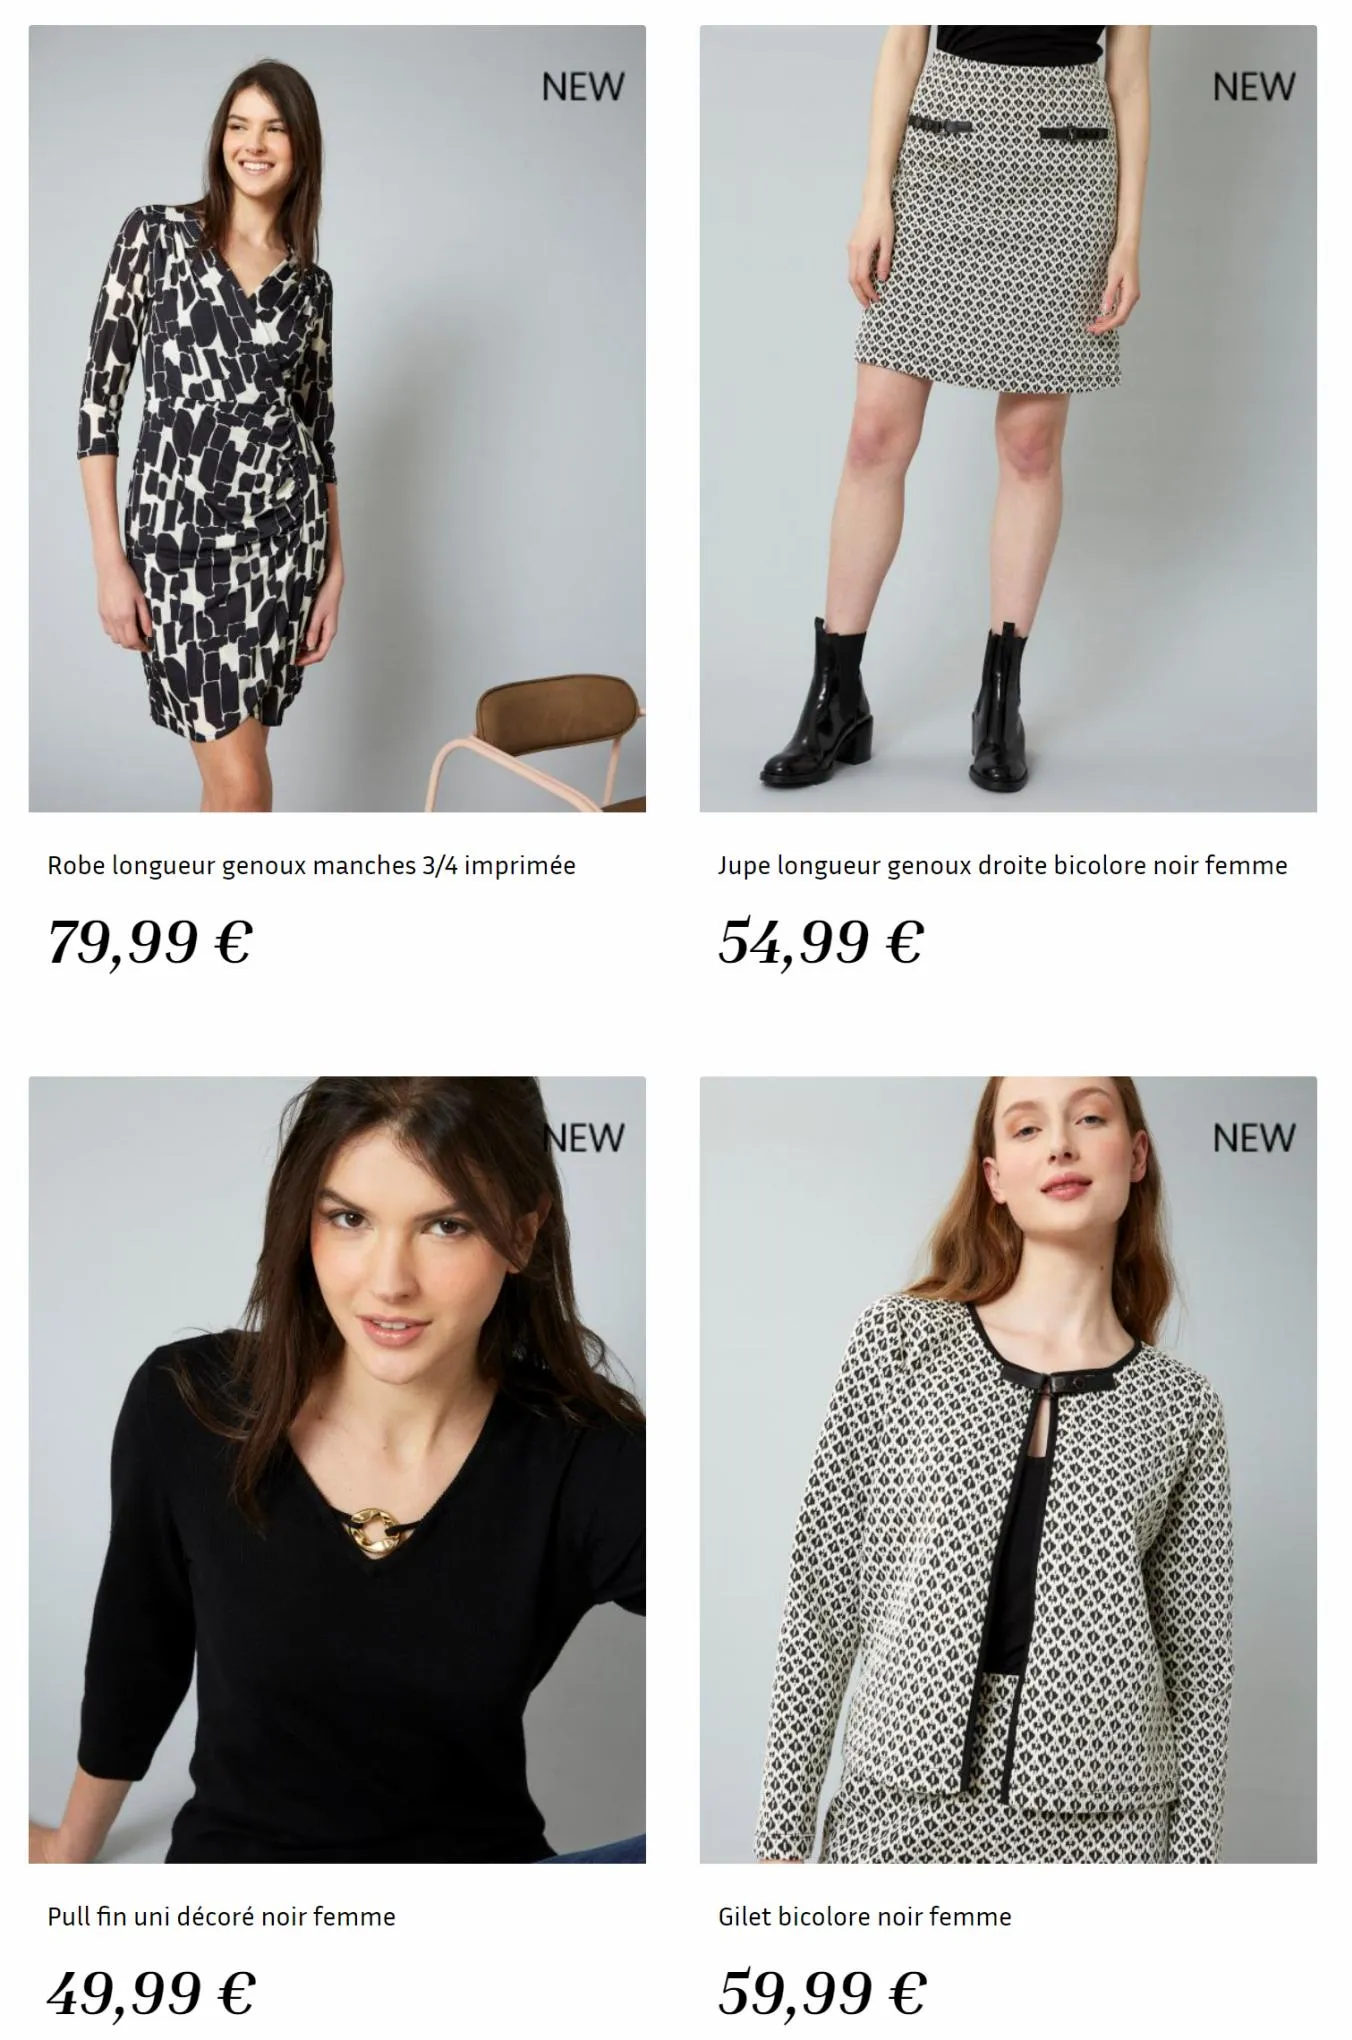 Catalogue SOLDES 60%, page 00005